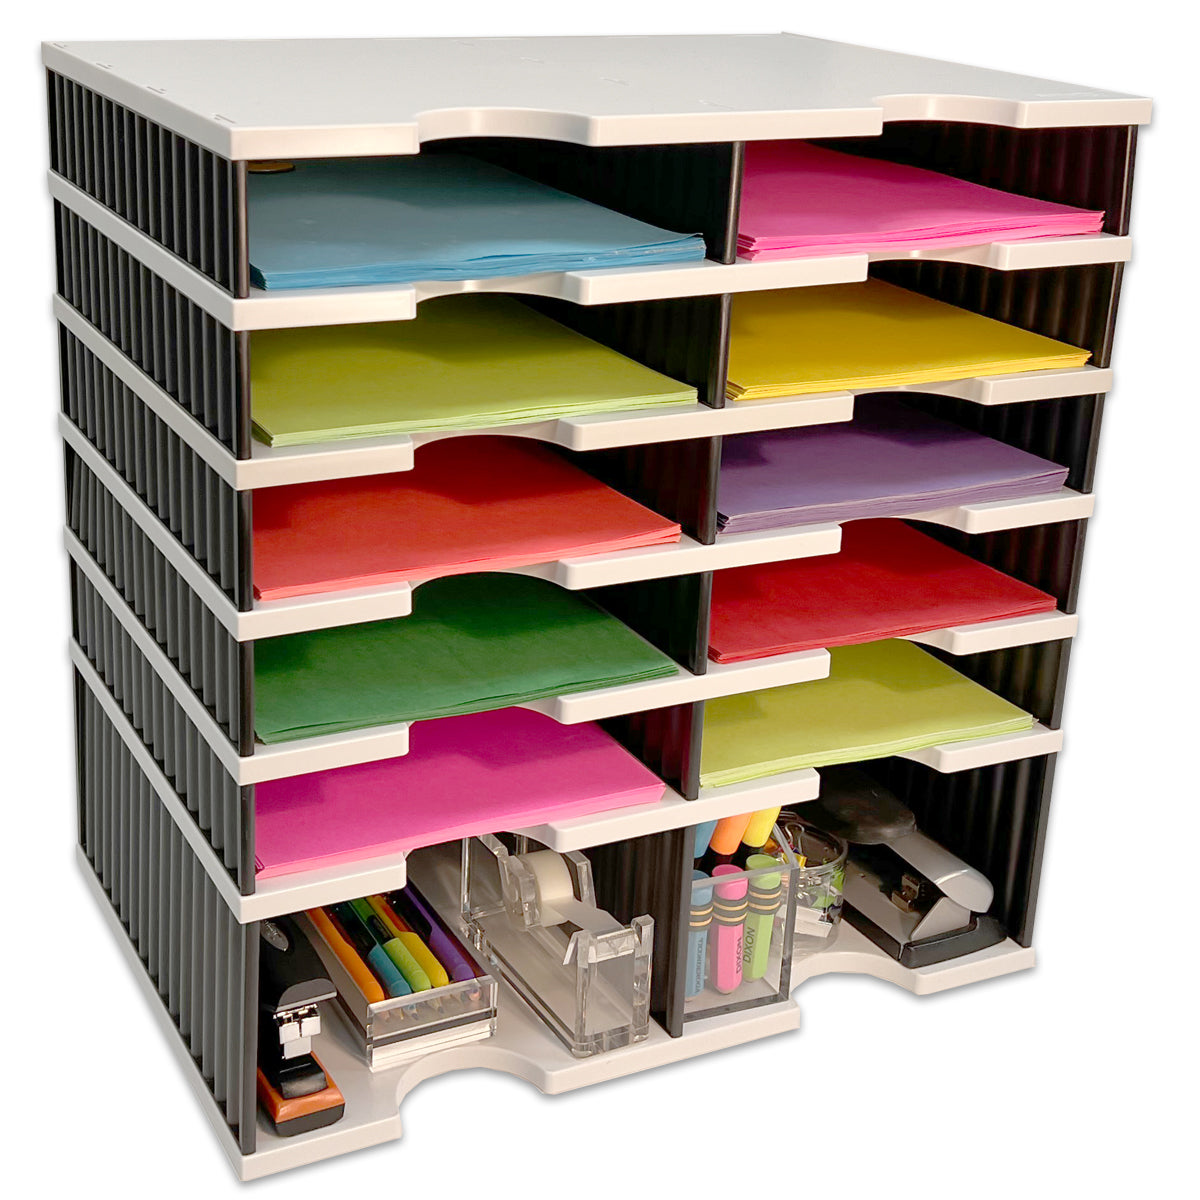 Ultimate Office Desktop Organizer 9 Letter Tray Sorter Plus Riser Storage Base for Easy Access to Lower Slots, Desk Accessories & Supplies. Optional